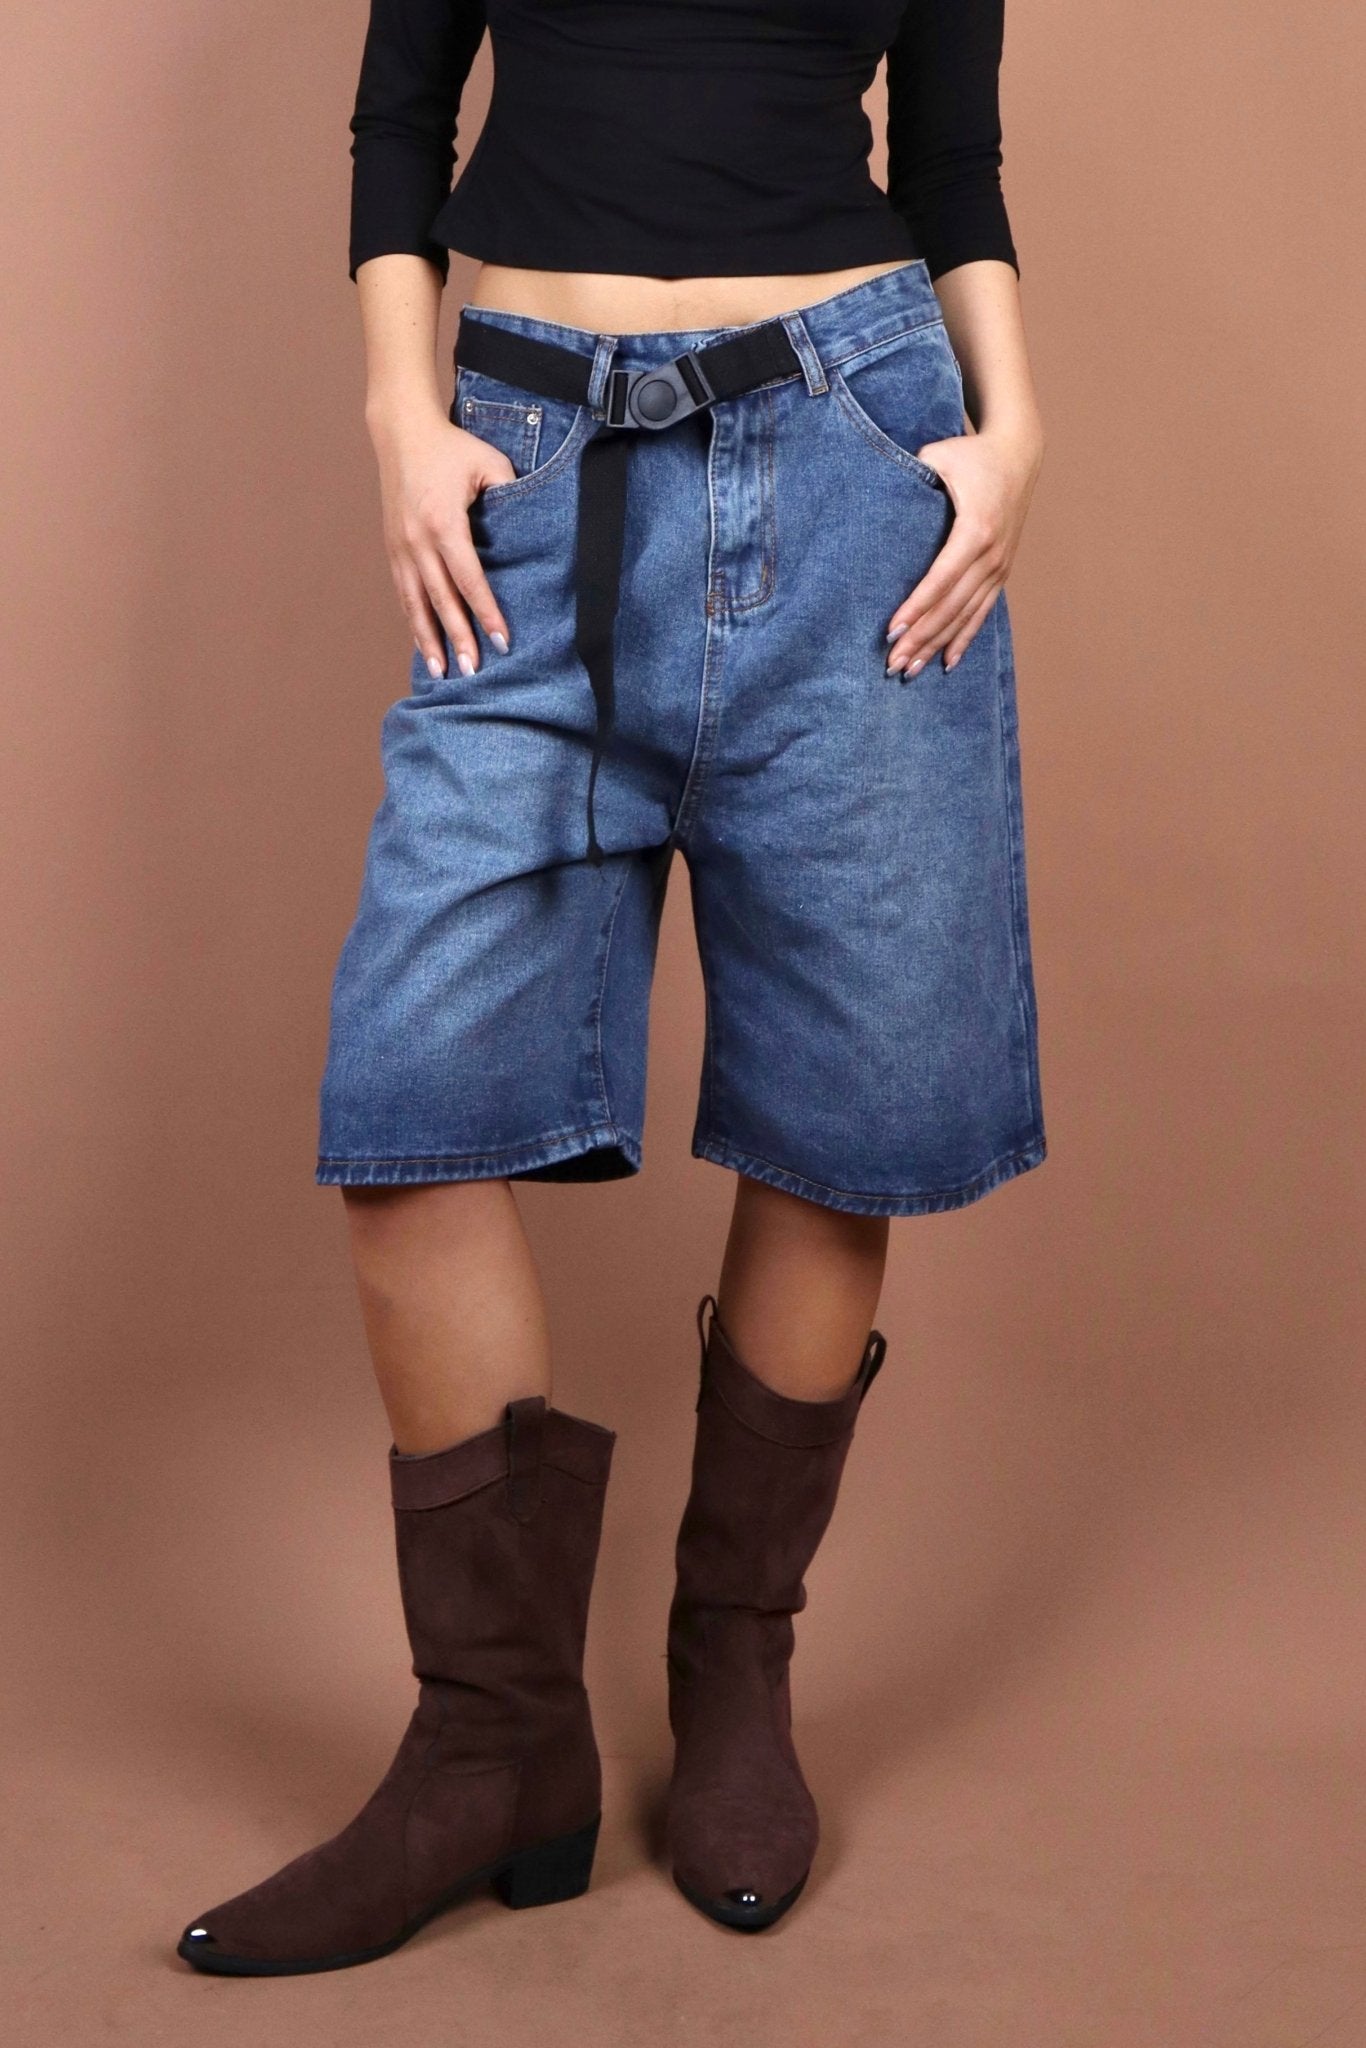 Belted Low Rise Jorts - SCG_COLLECTIONSBottom